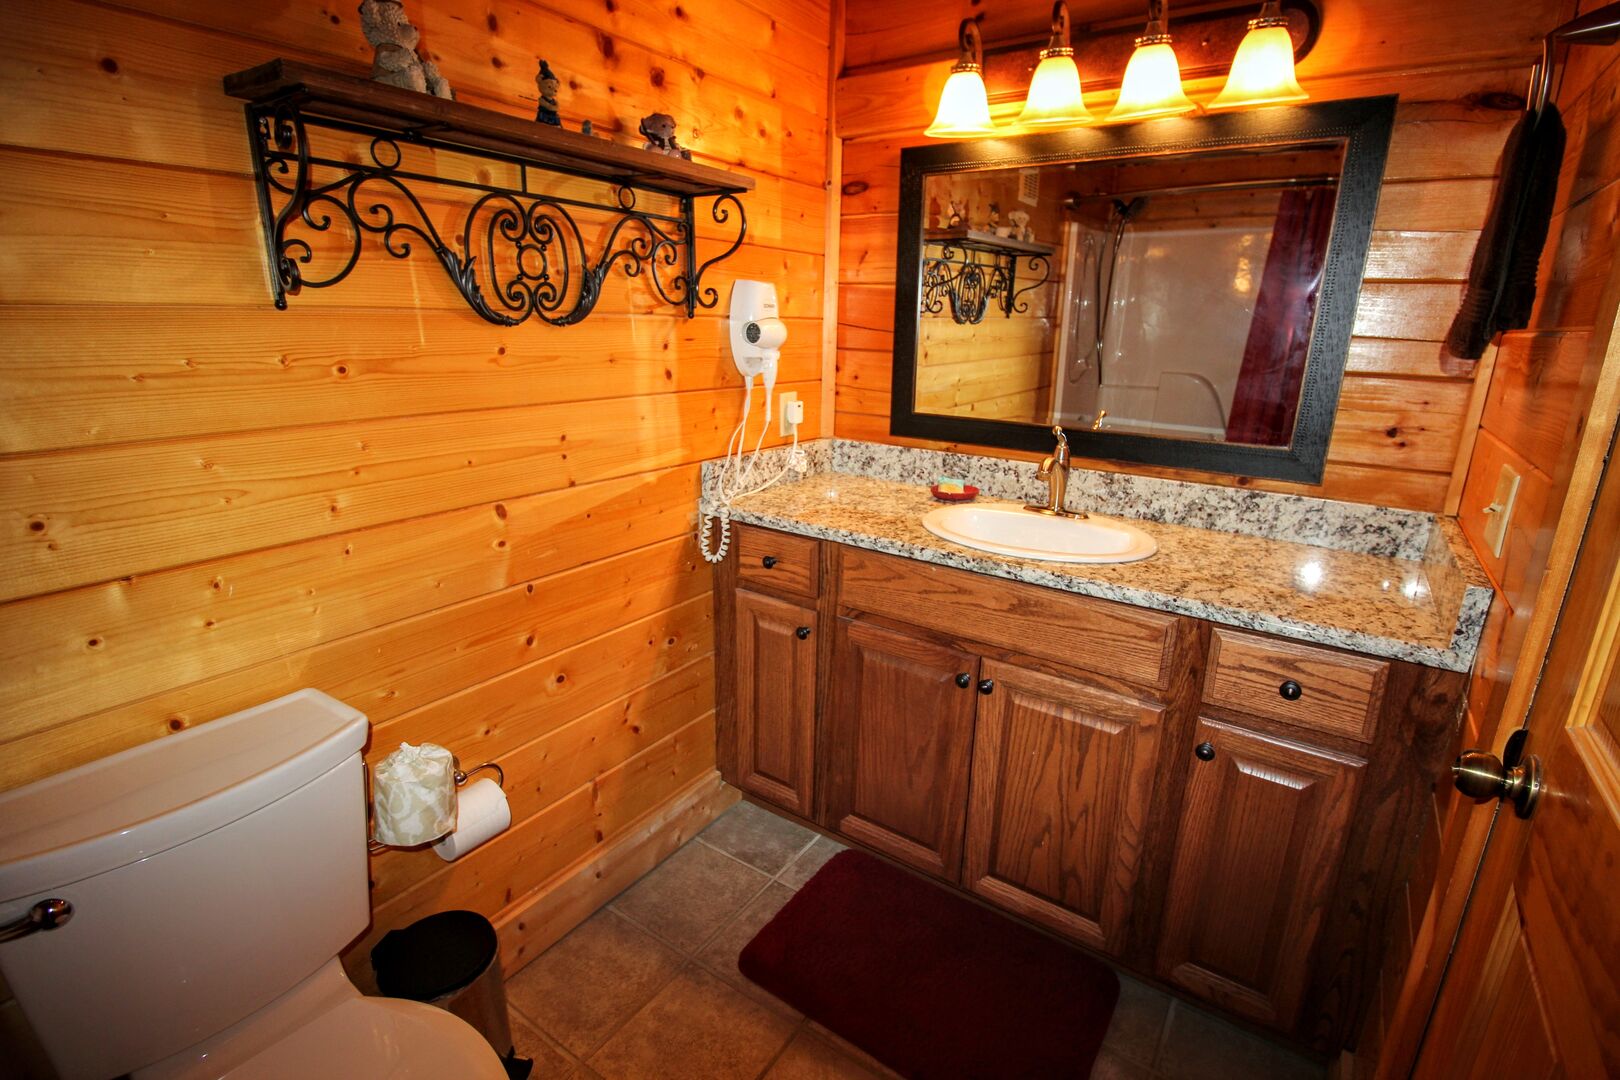 DOWNSTAIRS FULL BATH WITH BLOW DRYER PROVIDED. OAK CABINET & GRANITE COUNTER TOP